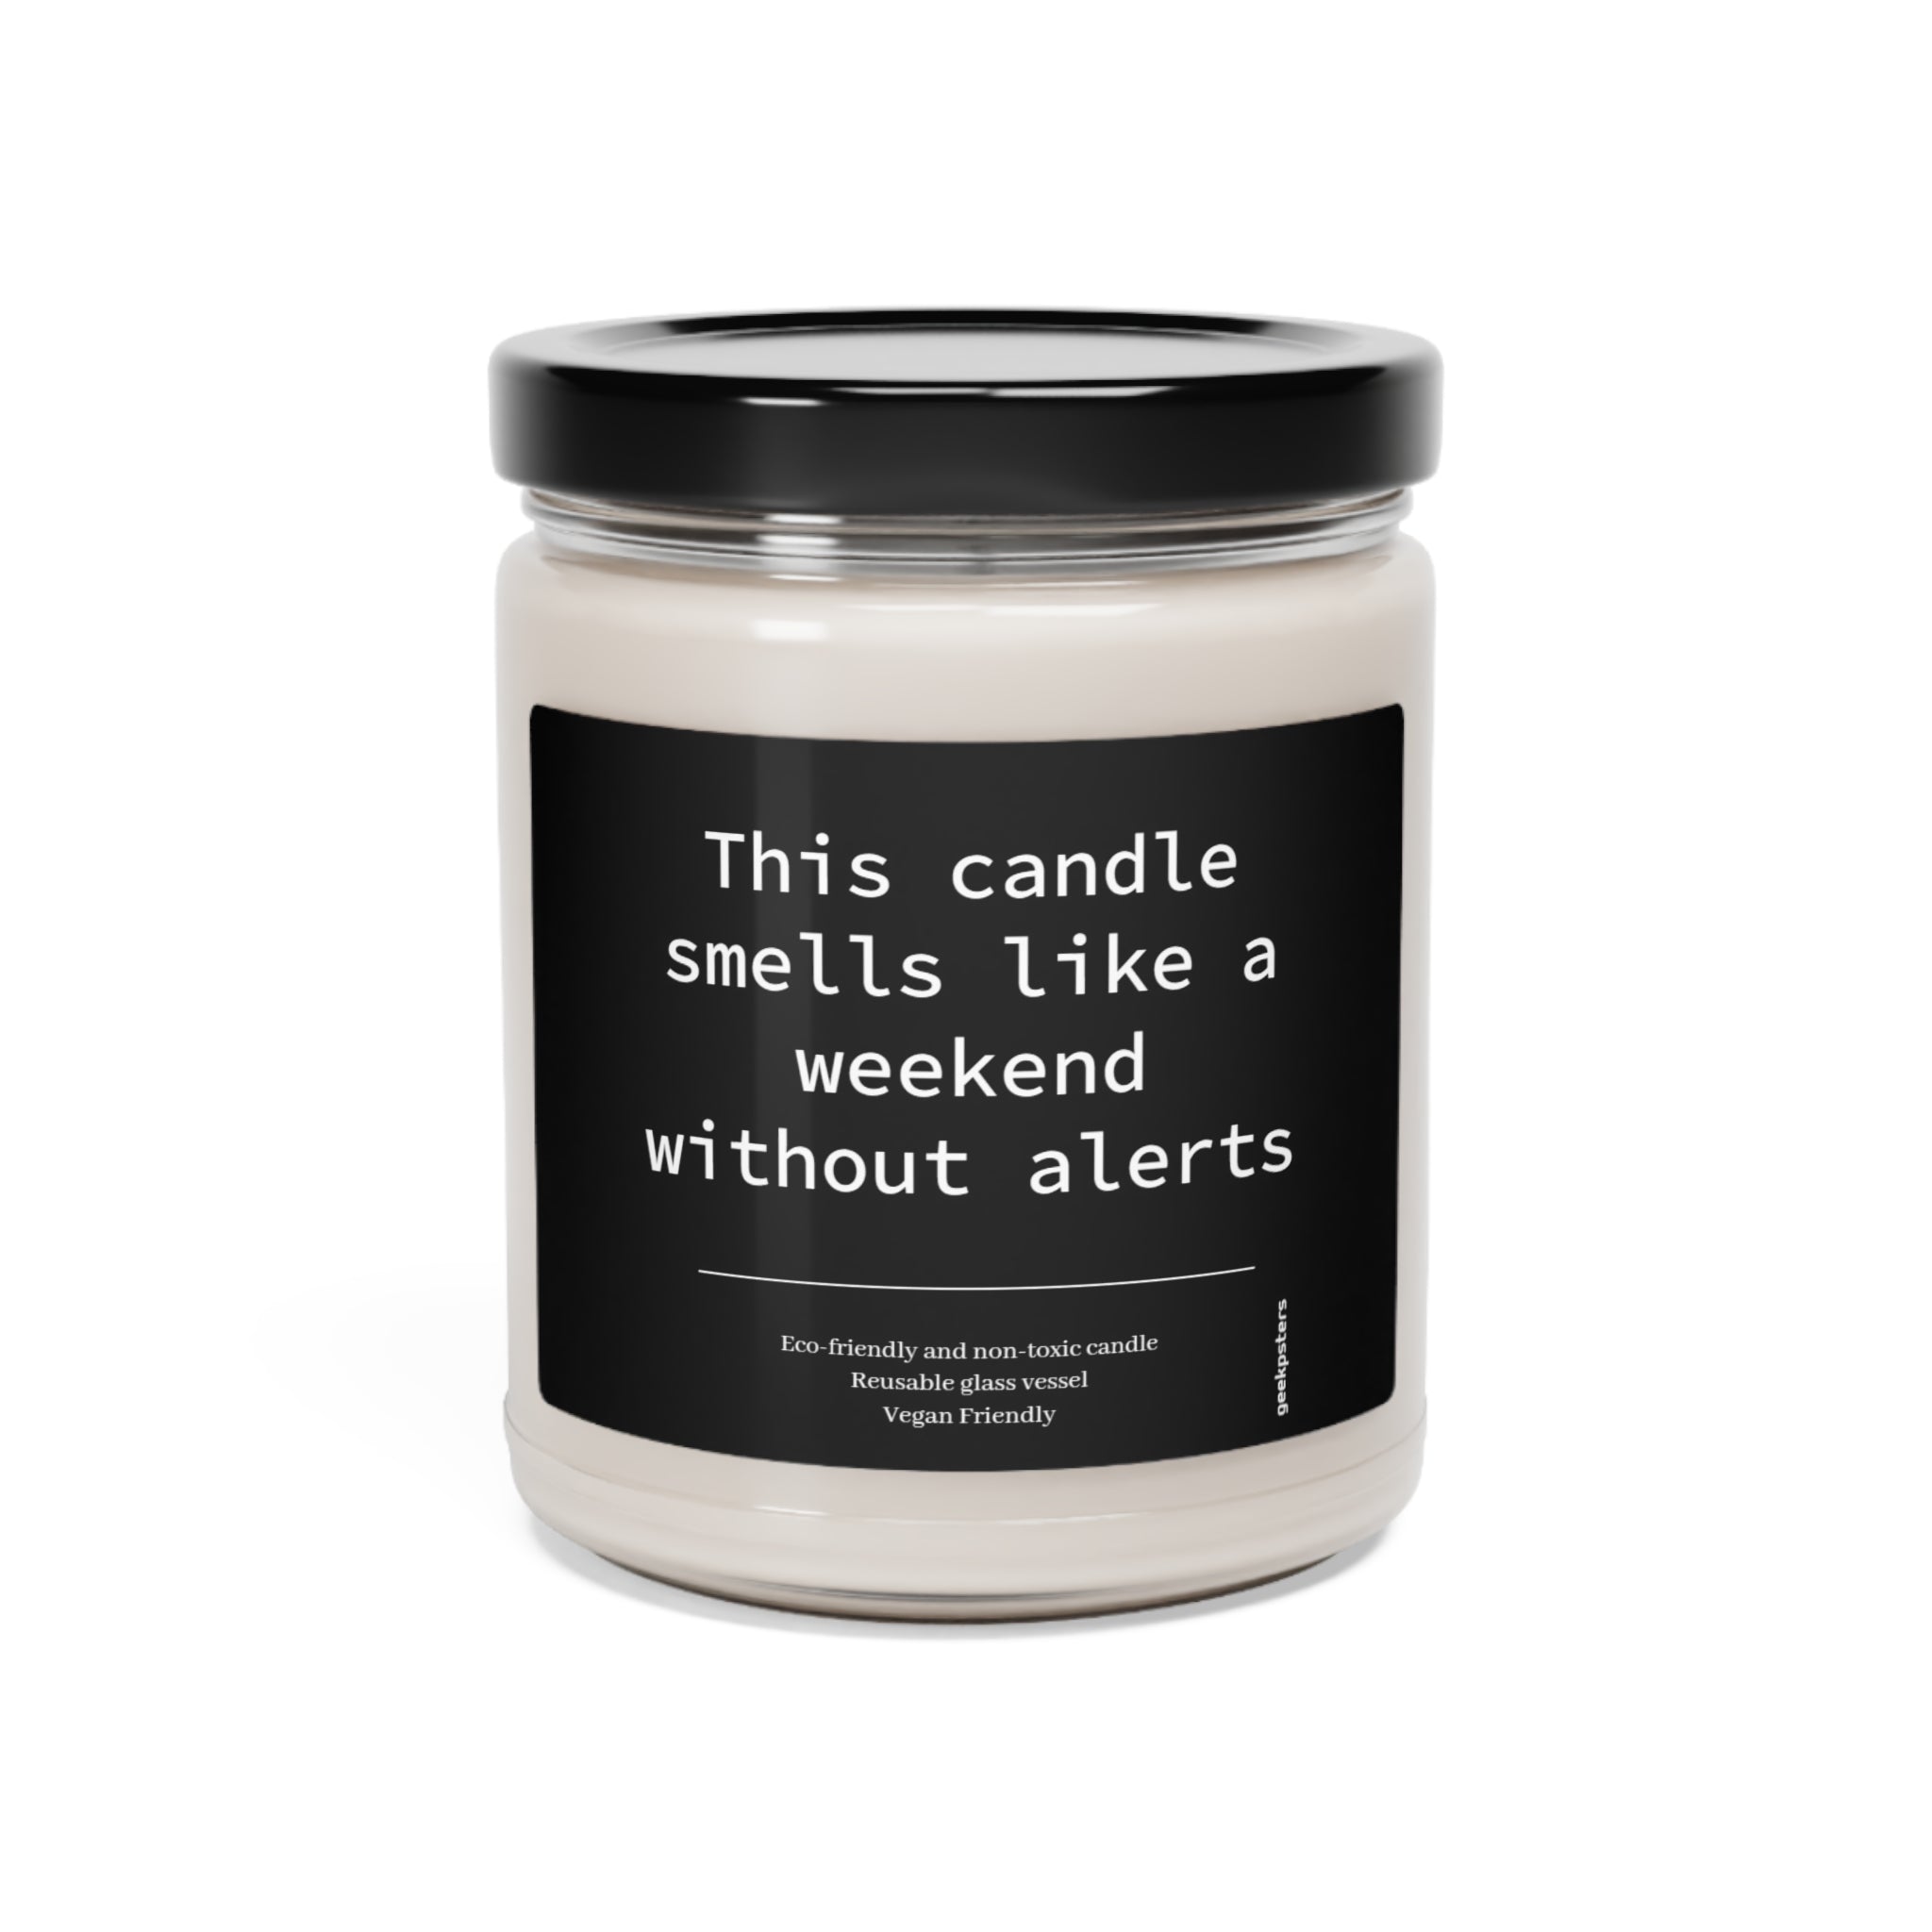 Scented soy candle with humorous label "this candle smells like a weekend without alerts", eco-friendly and vegan friendly, encased in a glass jar.